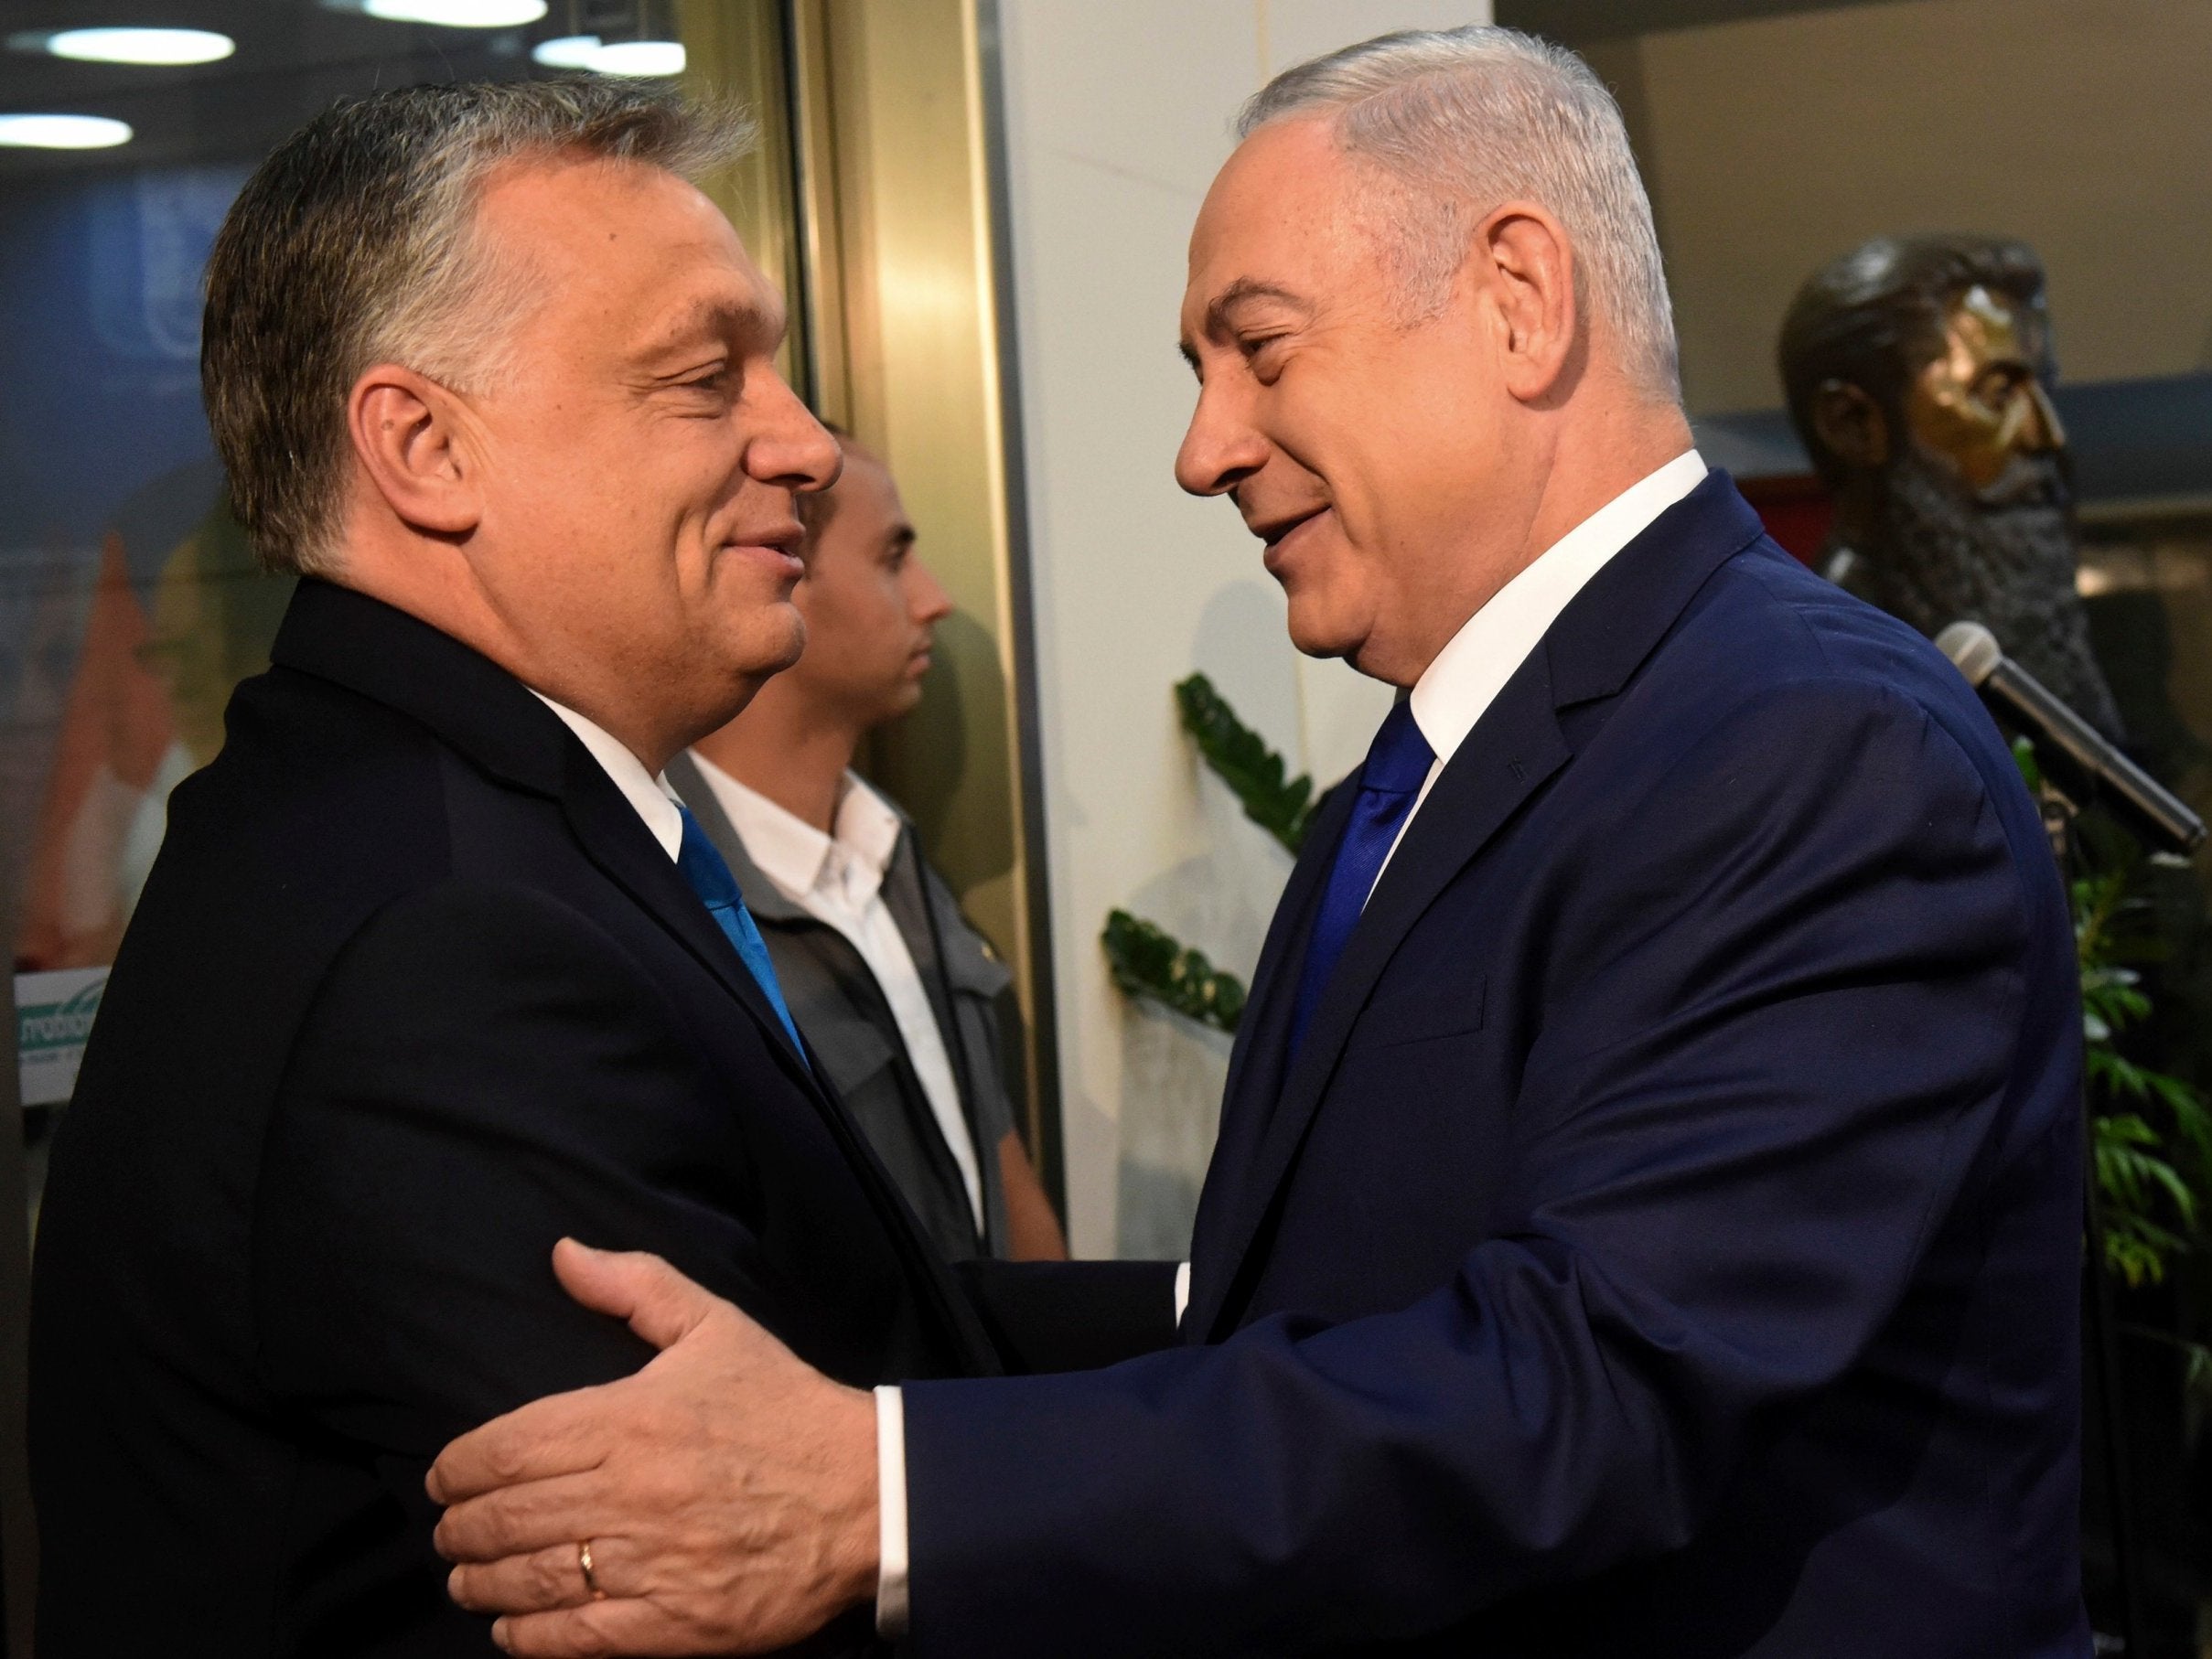 Hungarian prime minister Viktor Orbán is welcomed by Israeli counterpart Benjamin Netanyahu upon his arrival in Jerusalem